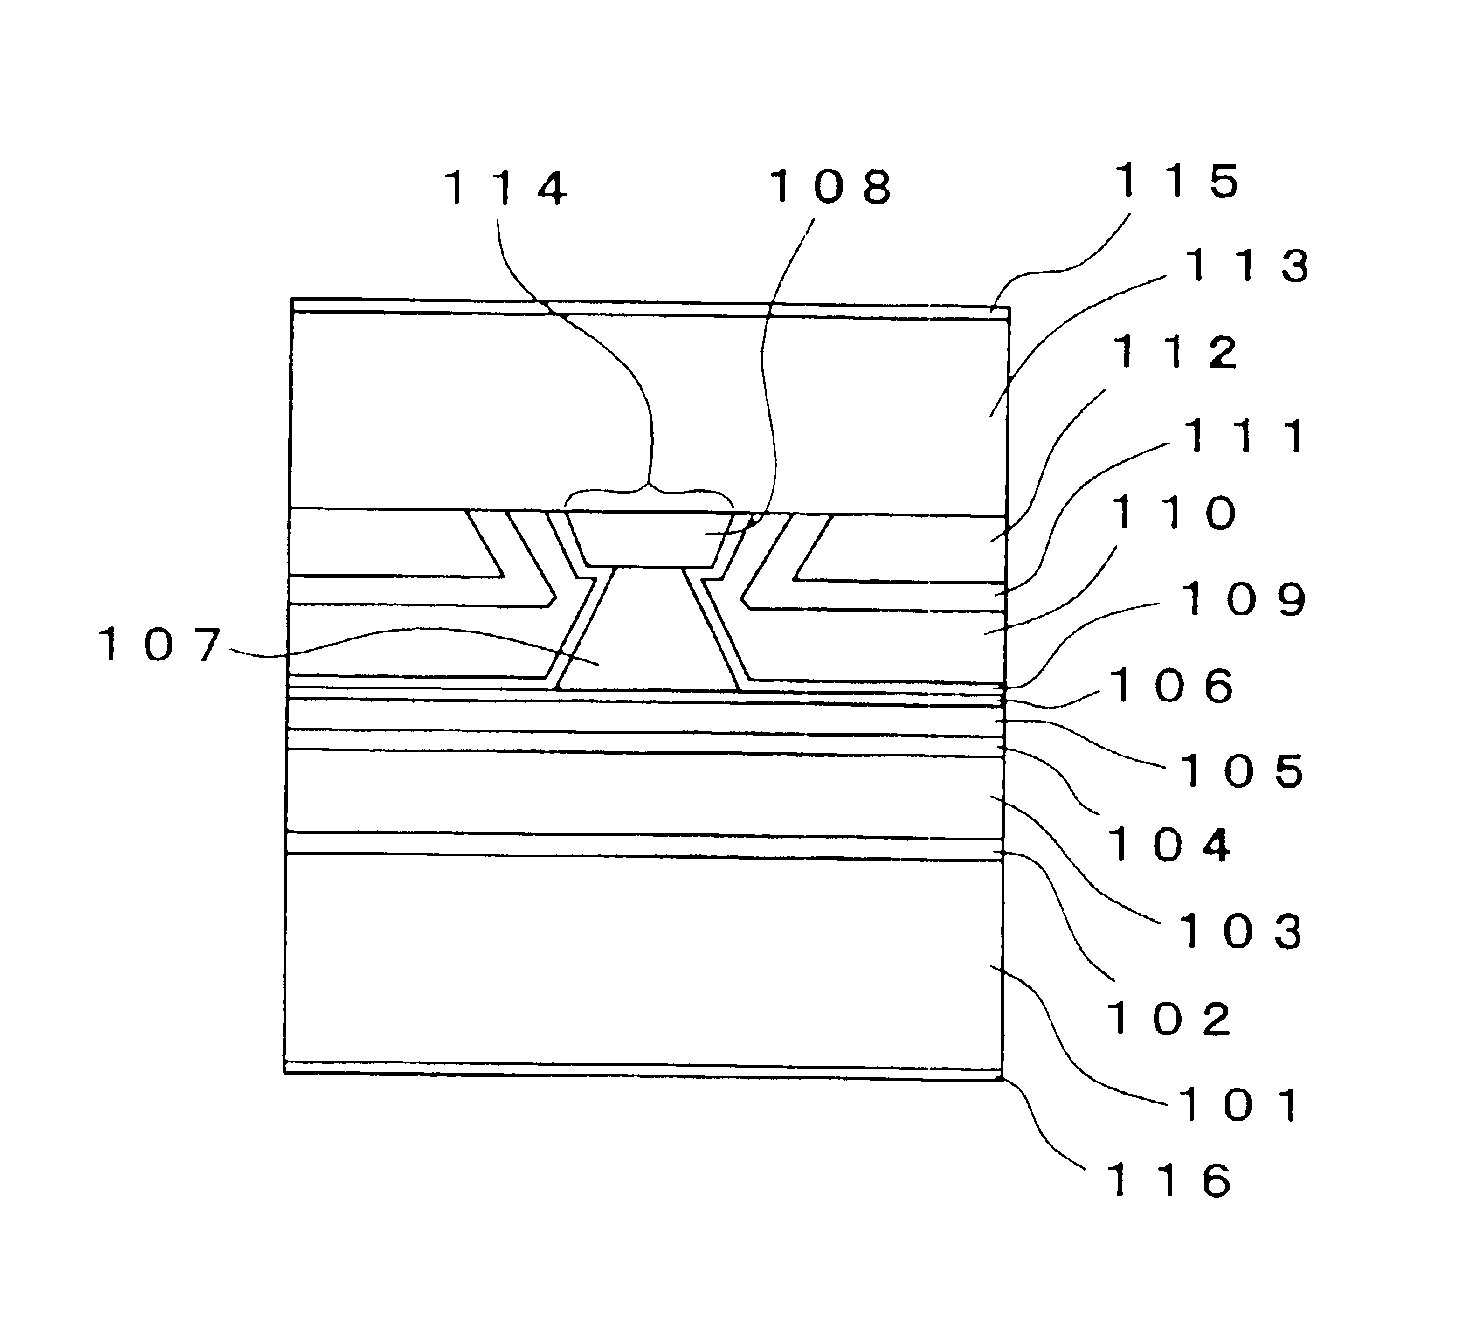 Semiconductor laser element